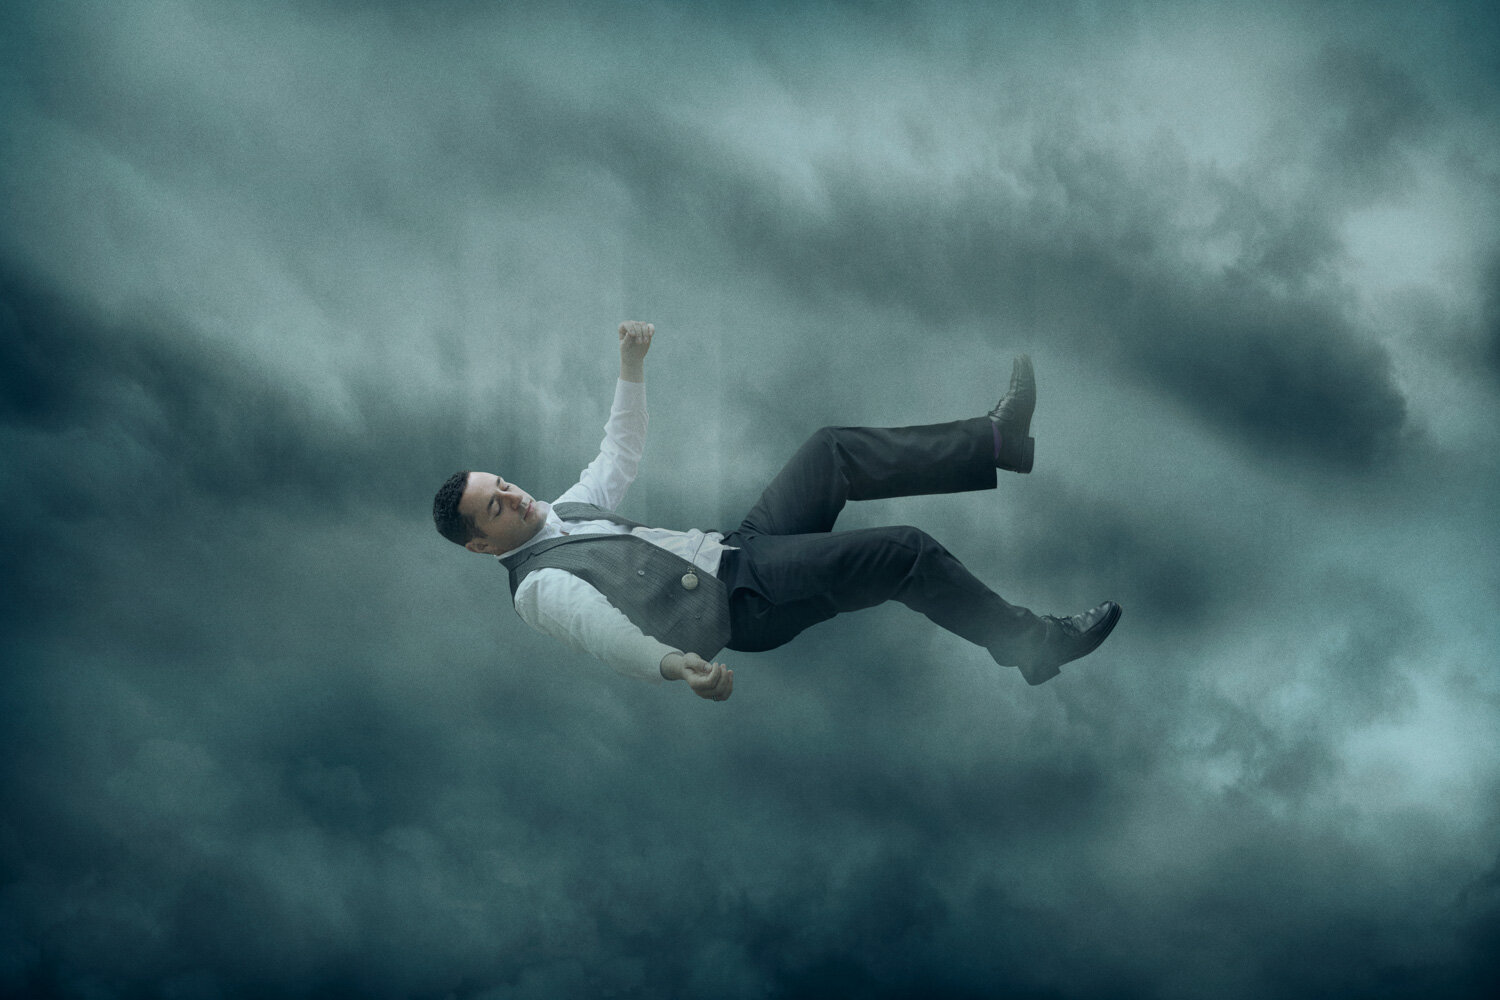 surreal portrait of singer in vintage outfit falling through clouds by conceptual portrait photographer Hanna Agar